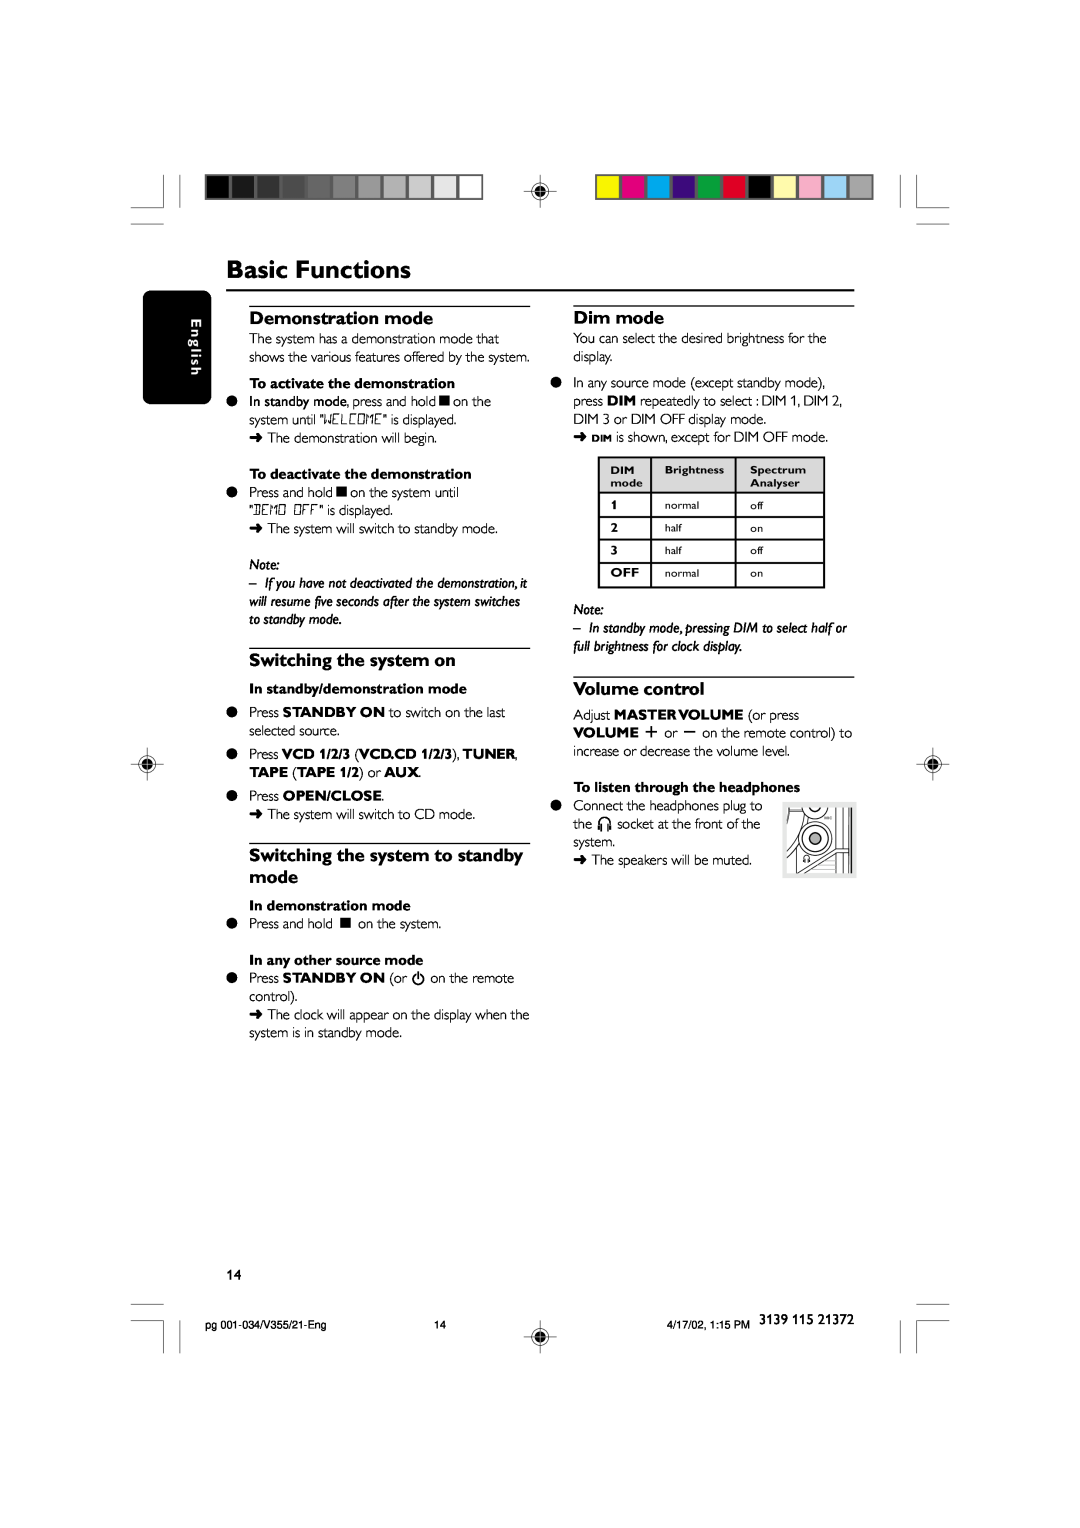 Philips FW-V355 manual Basic Functions, Demonstration mode, To activate the demonstration, To deactivate the demonstration 